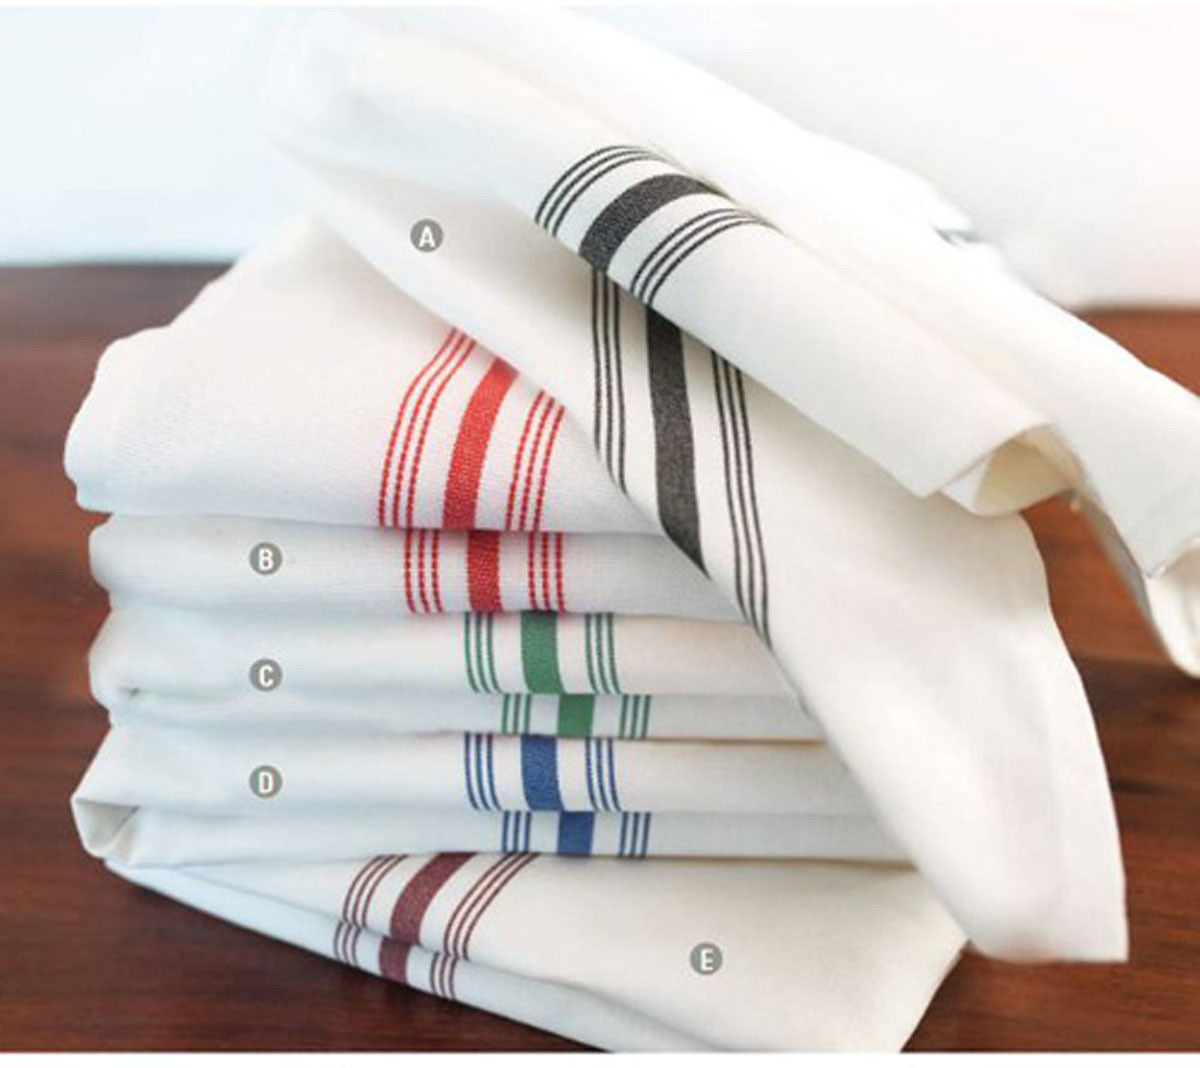 What is the material of the Colored Striped Bistro Napkin?